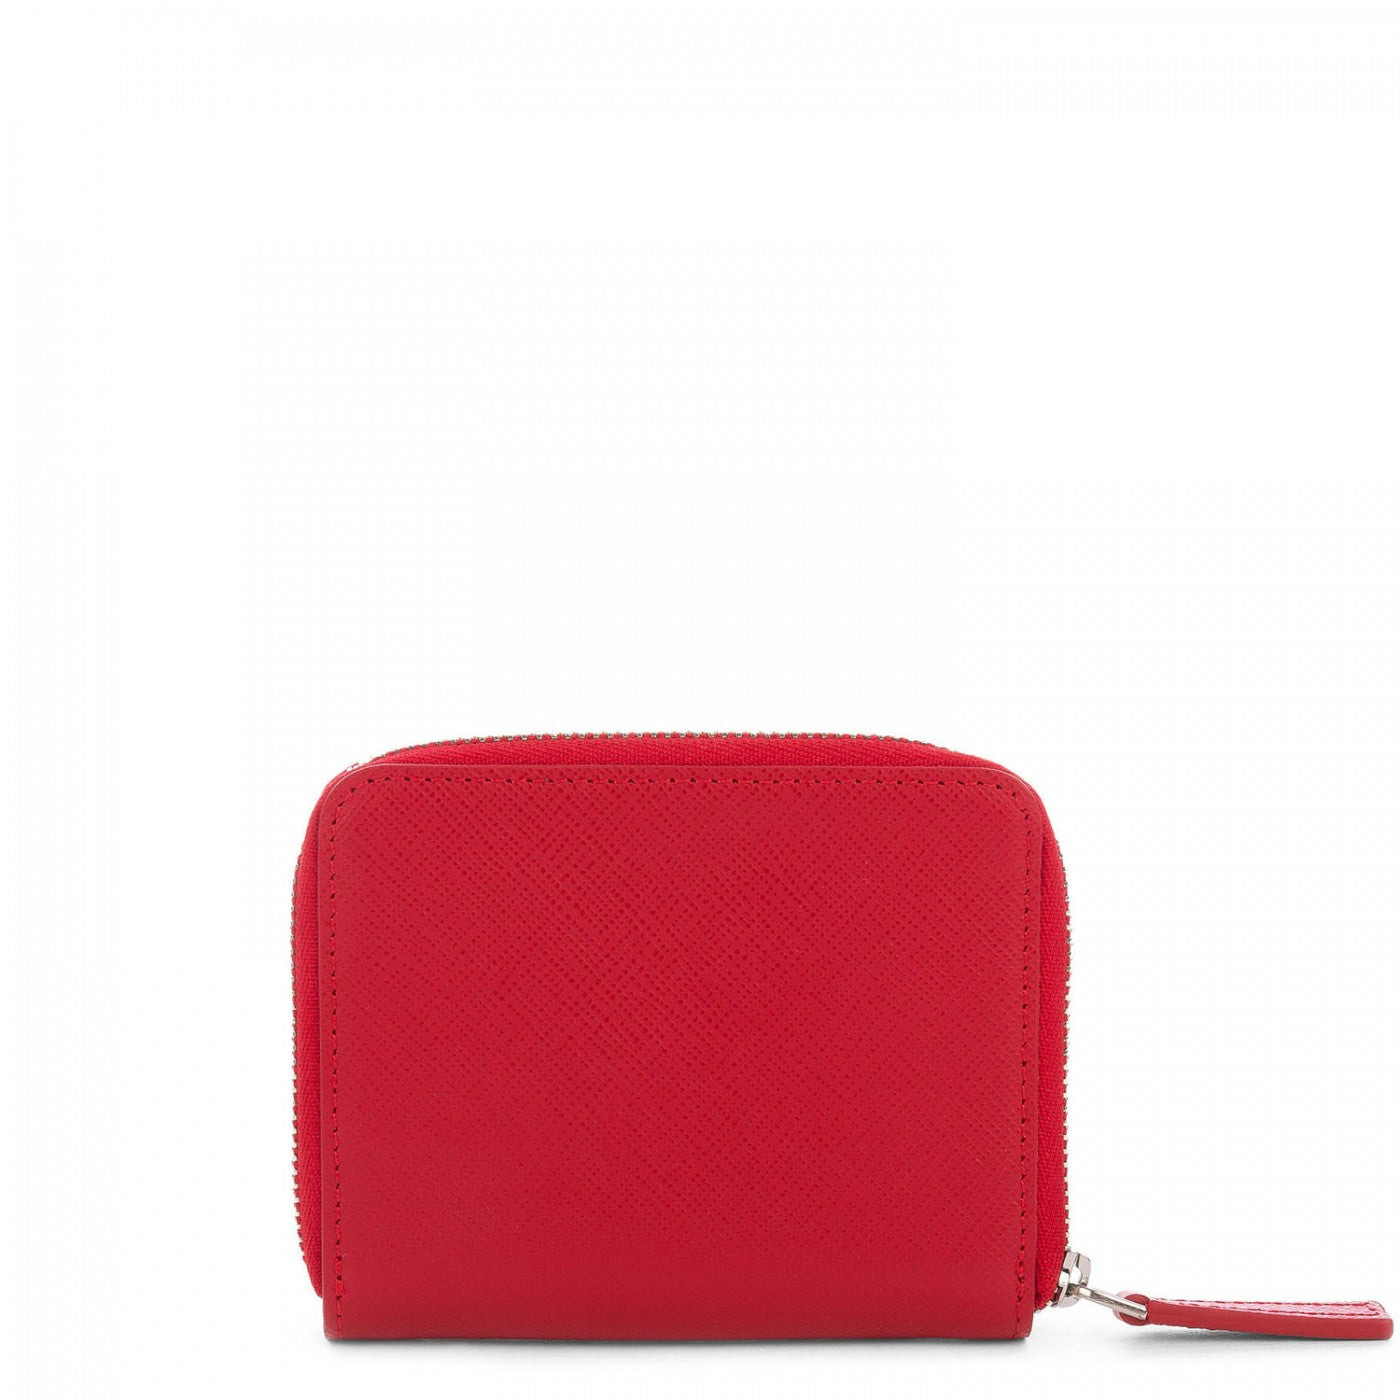 LANCASTER COIN PURSE - RED